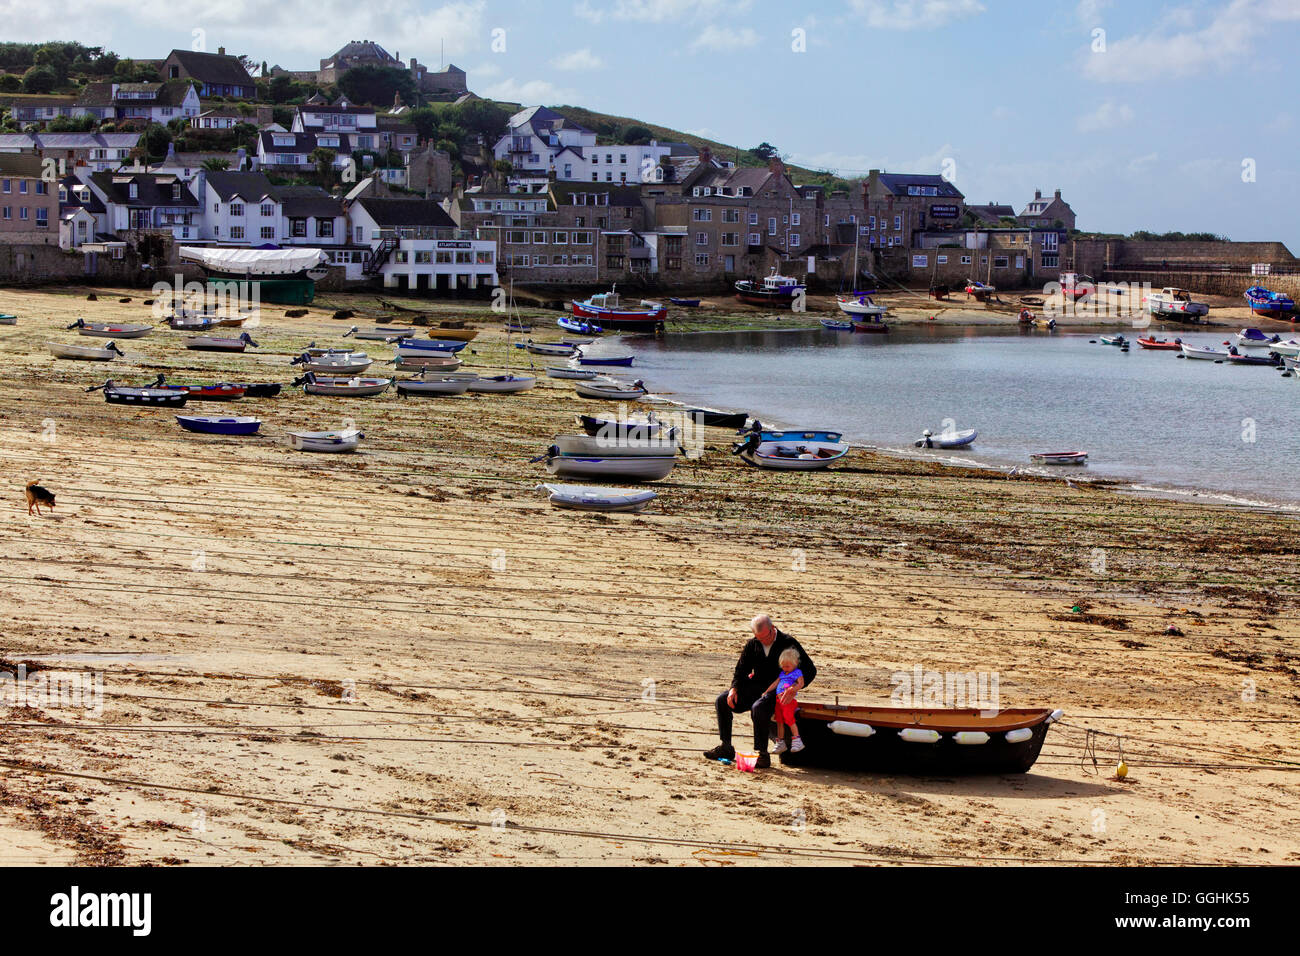 Man and child on the beach, Hugh Town, St. Marys, Isles of Scilly, Cornwall, England, Great Britain Stock Photo